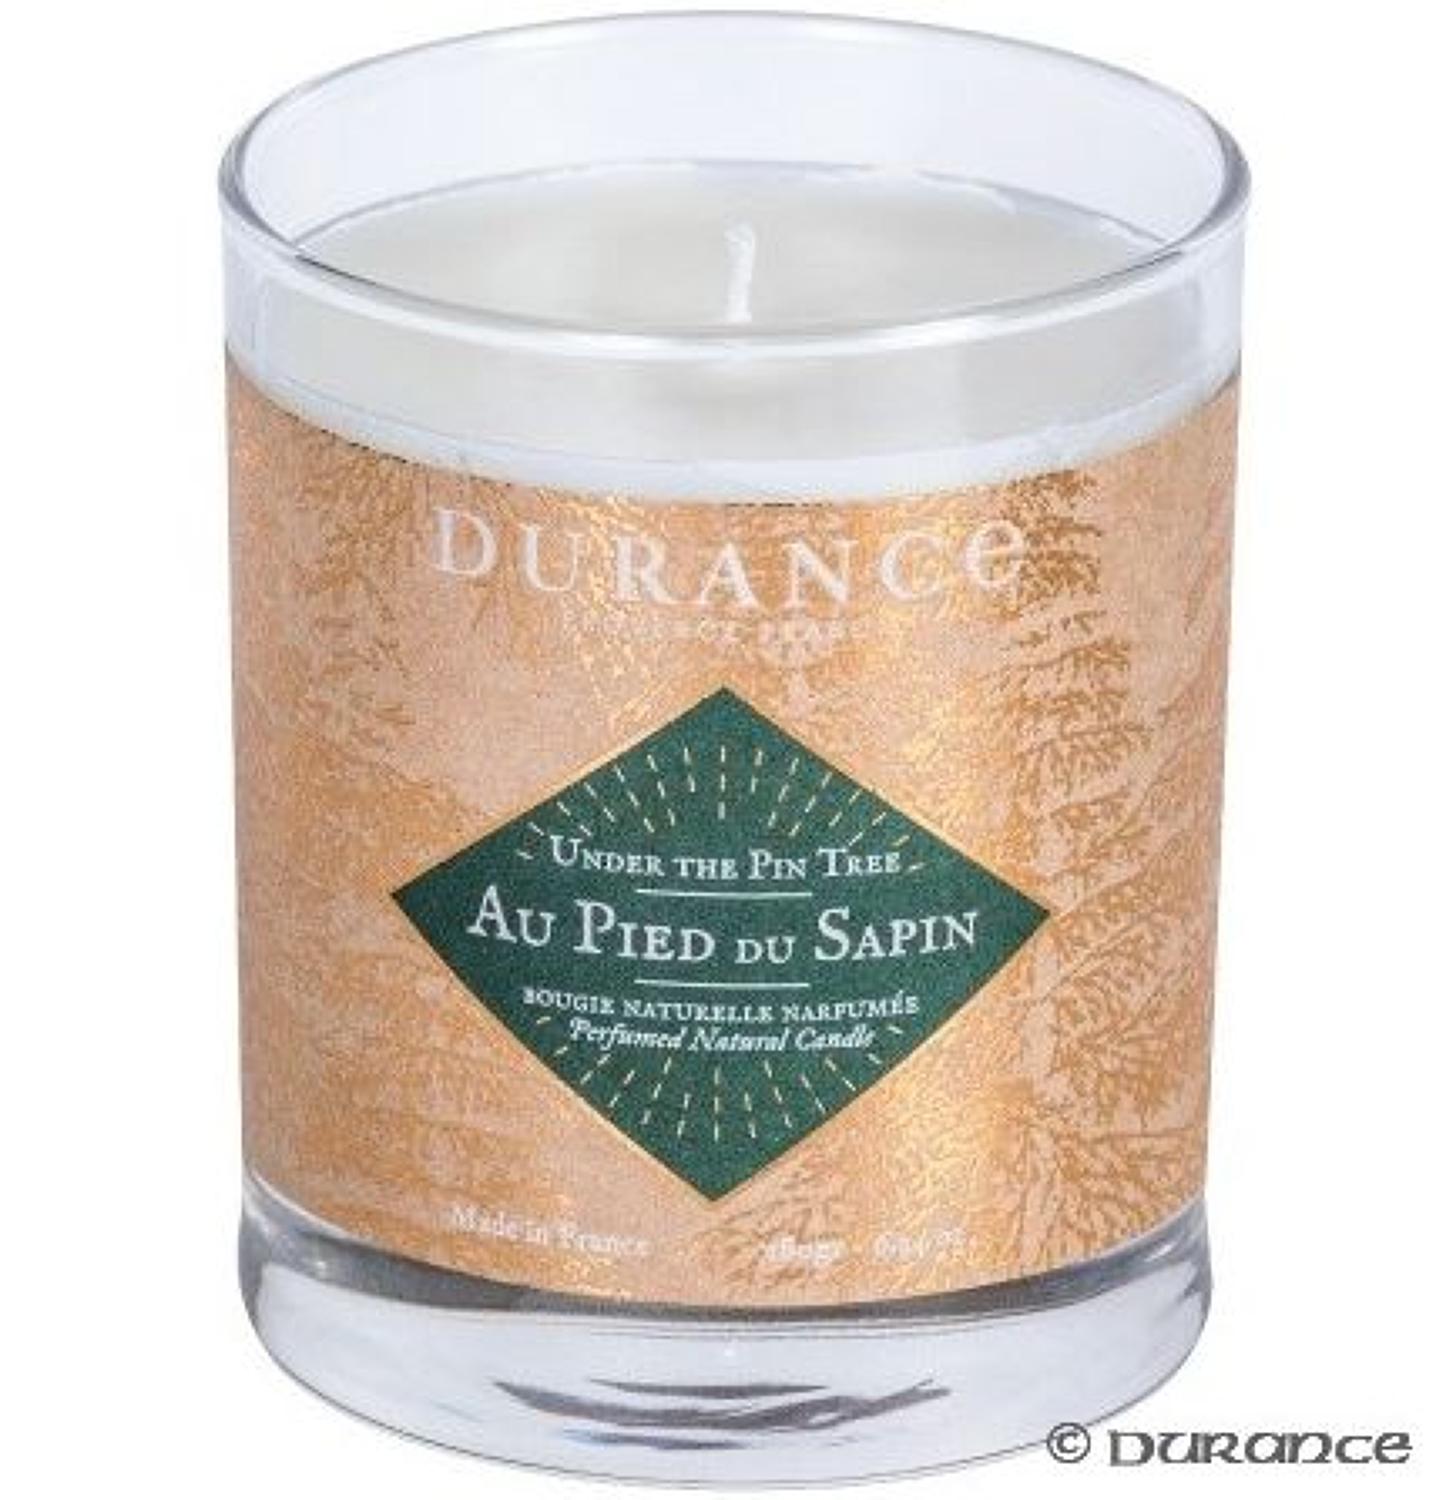 Under The Pine Tree candle - 180g